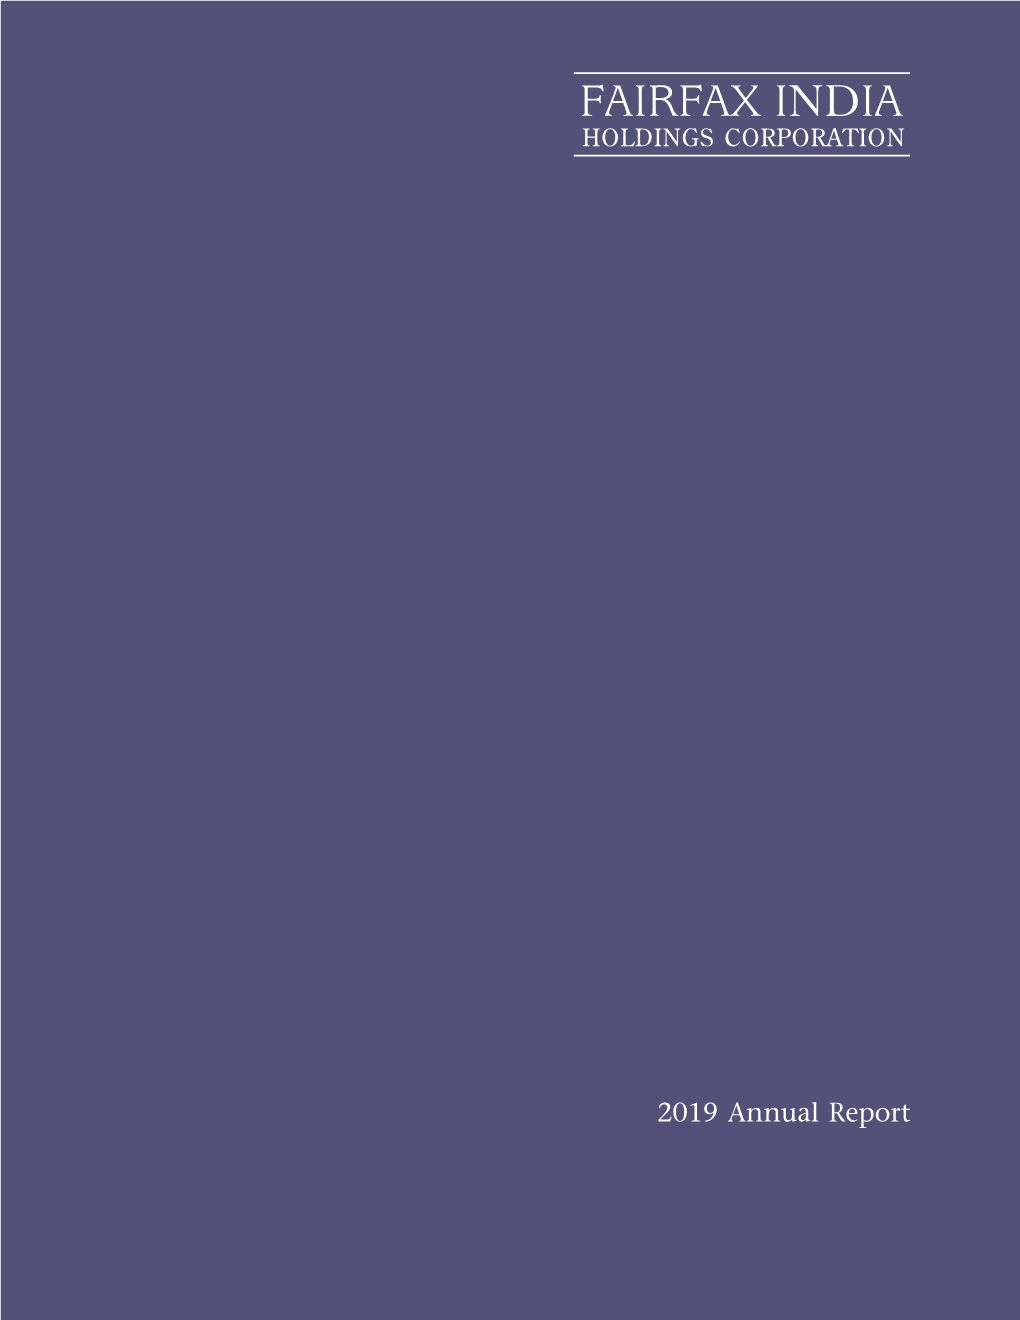 2019 Annual Report Contents